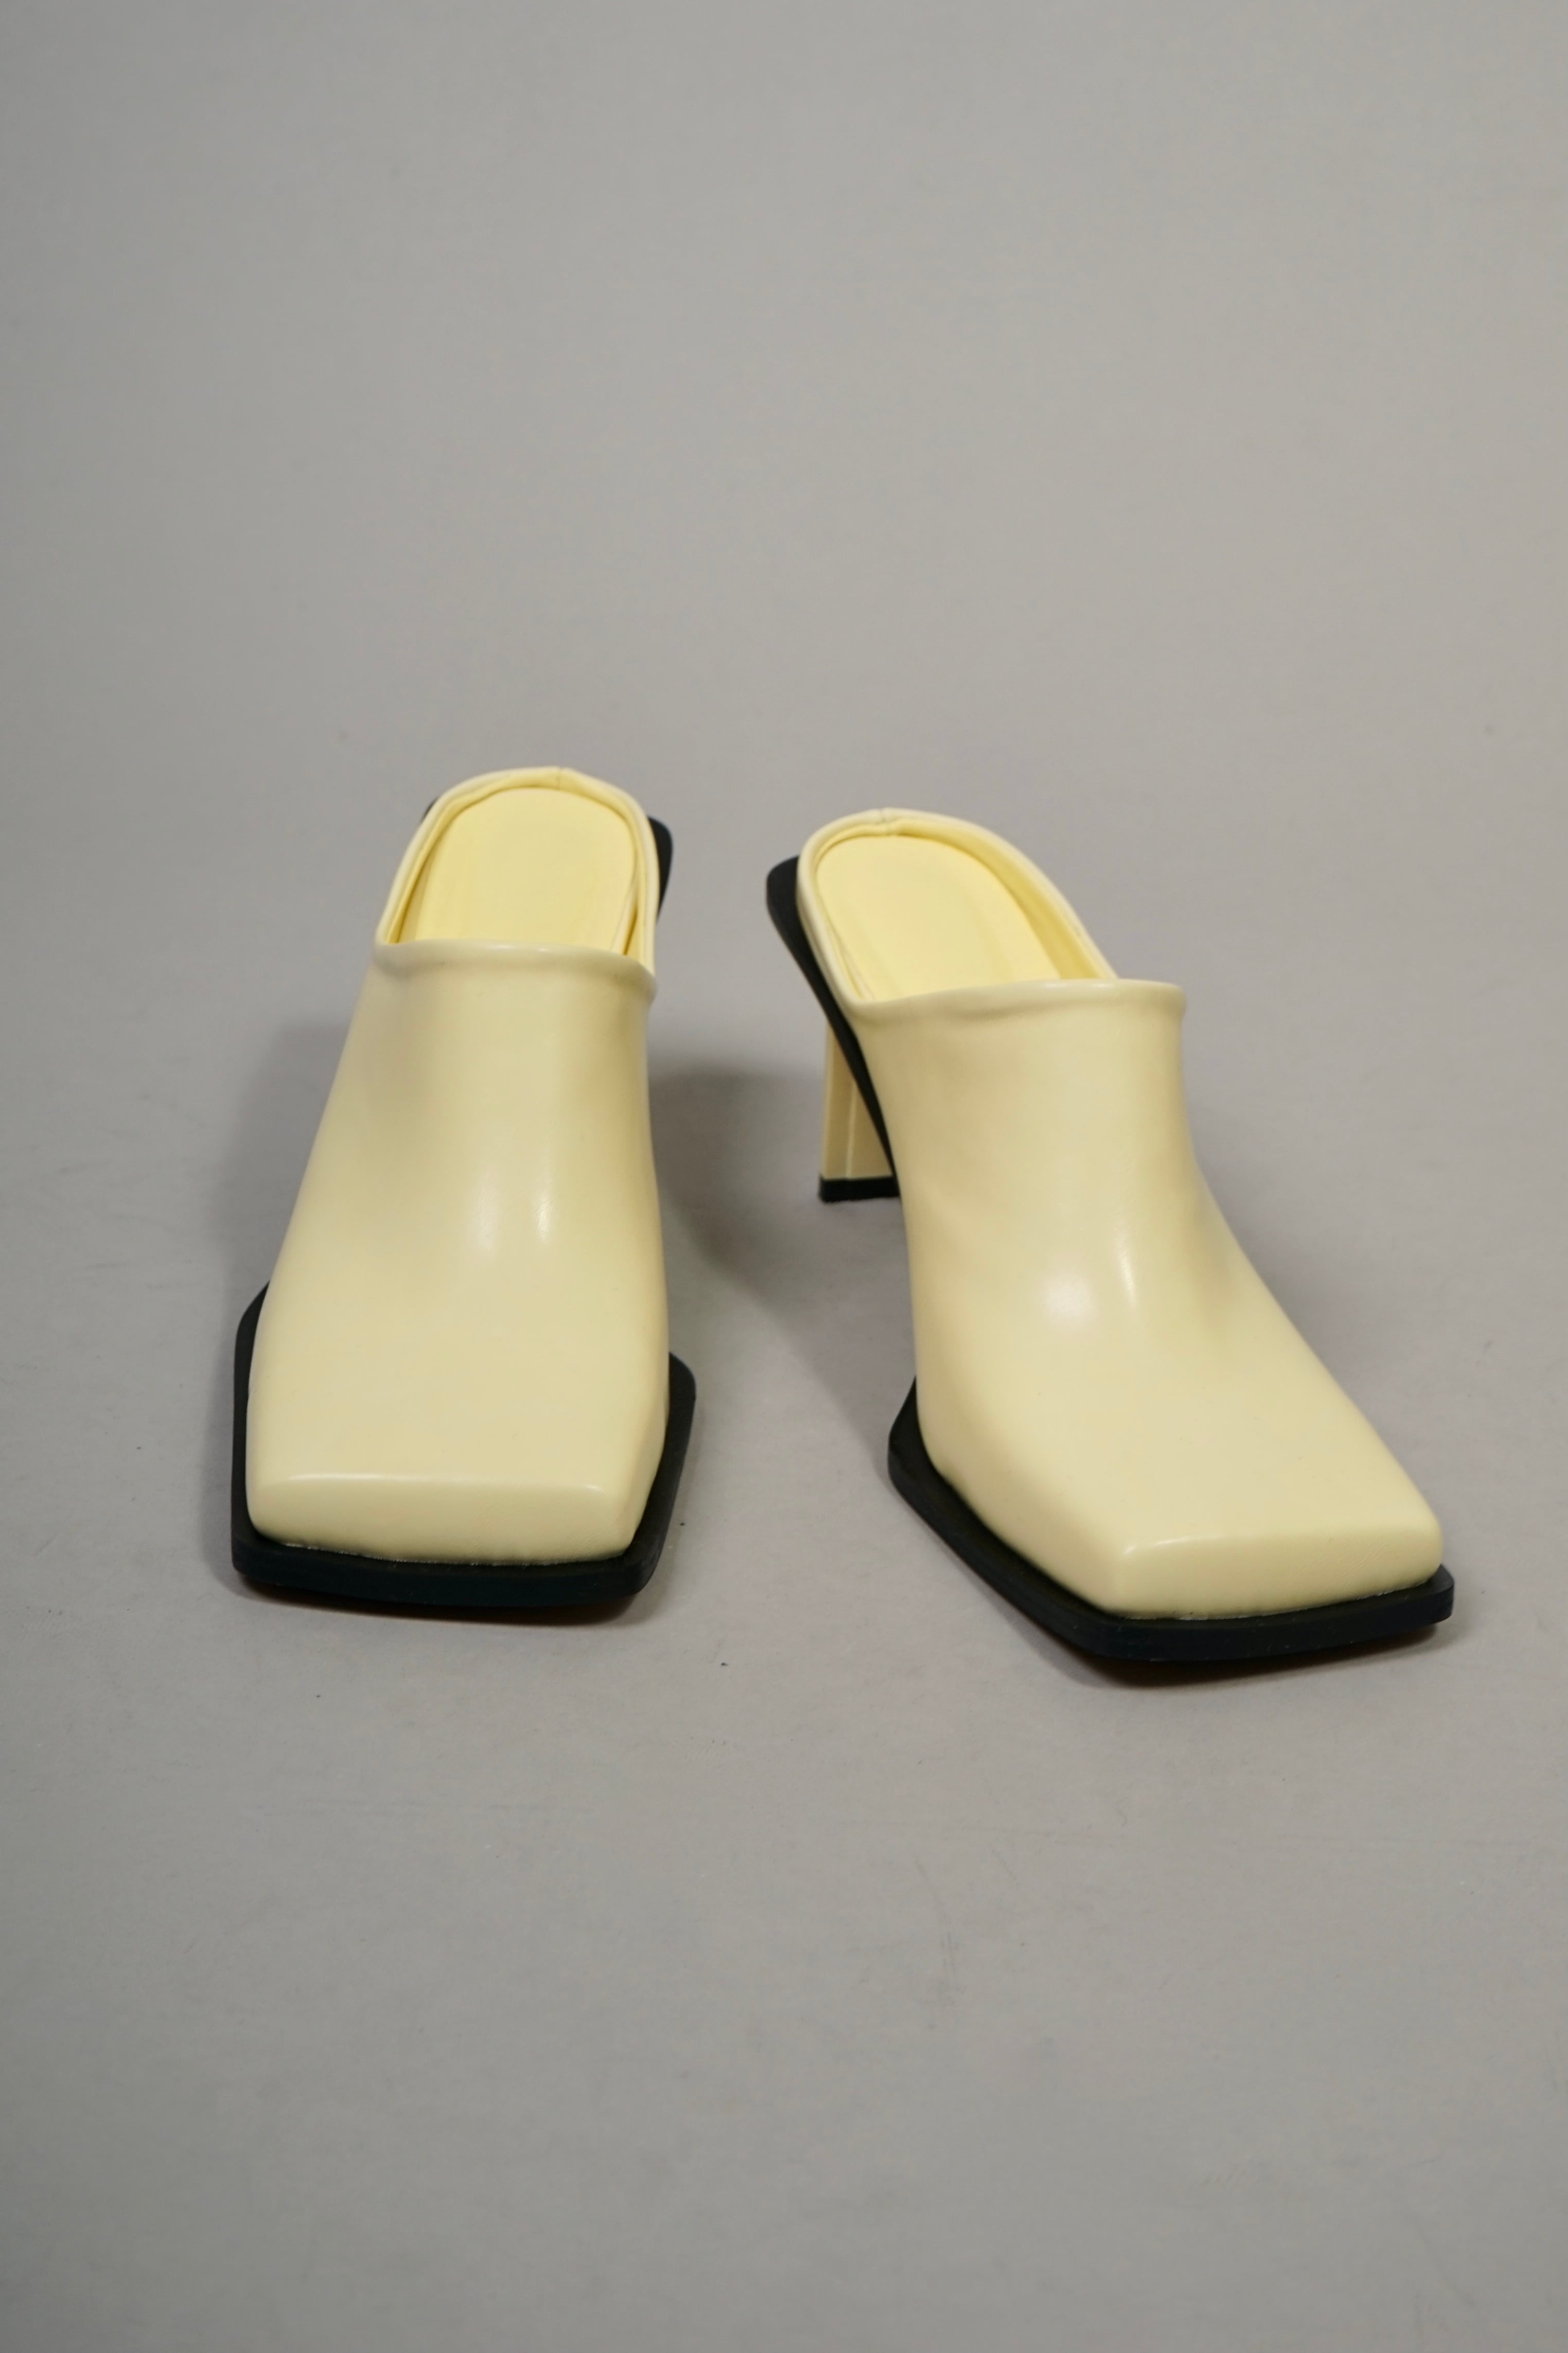 SQUARE SANDALS (YELLOW) 2201-03-9350